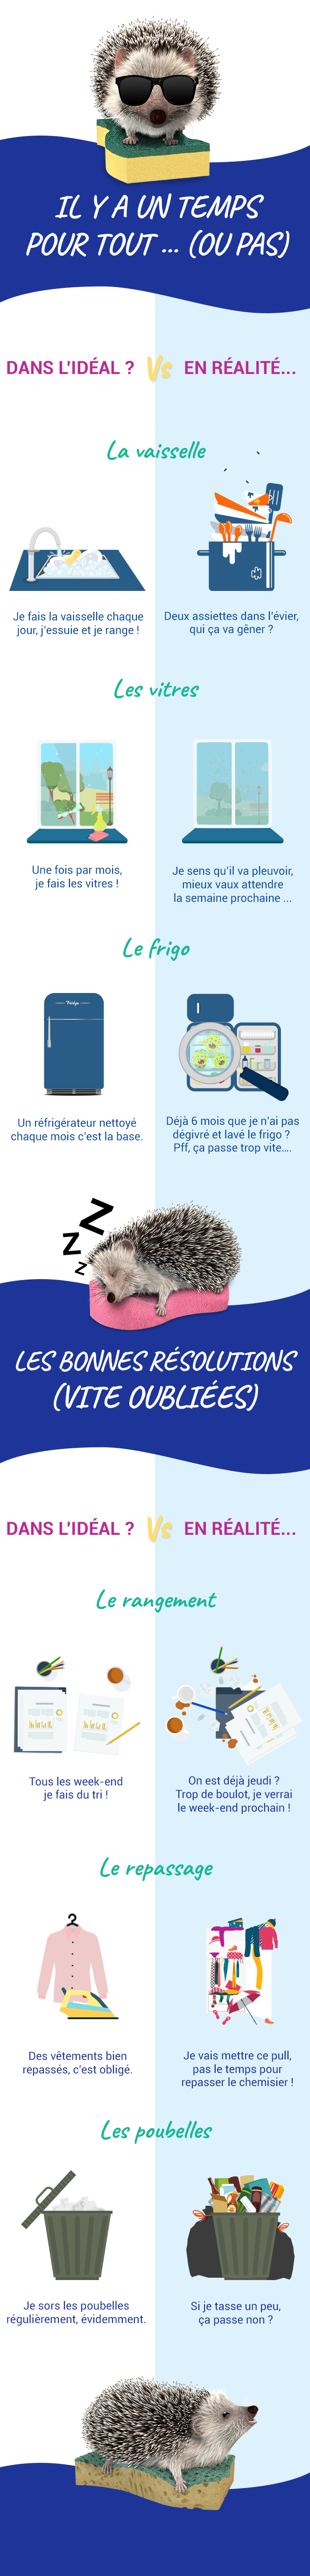 infographie routine ménage